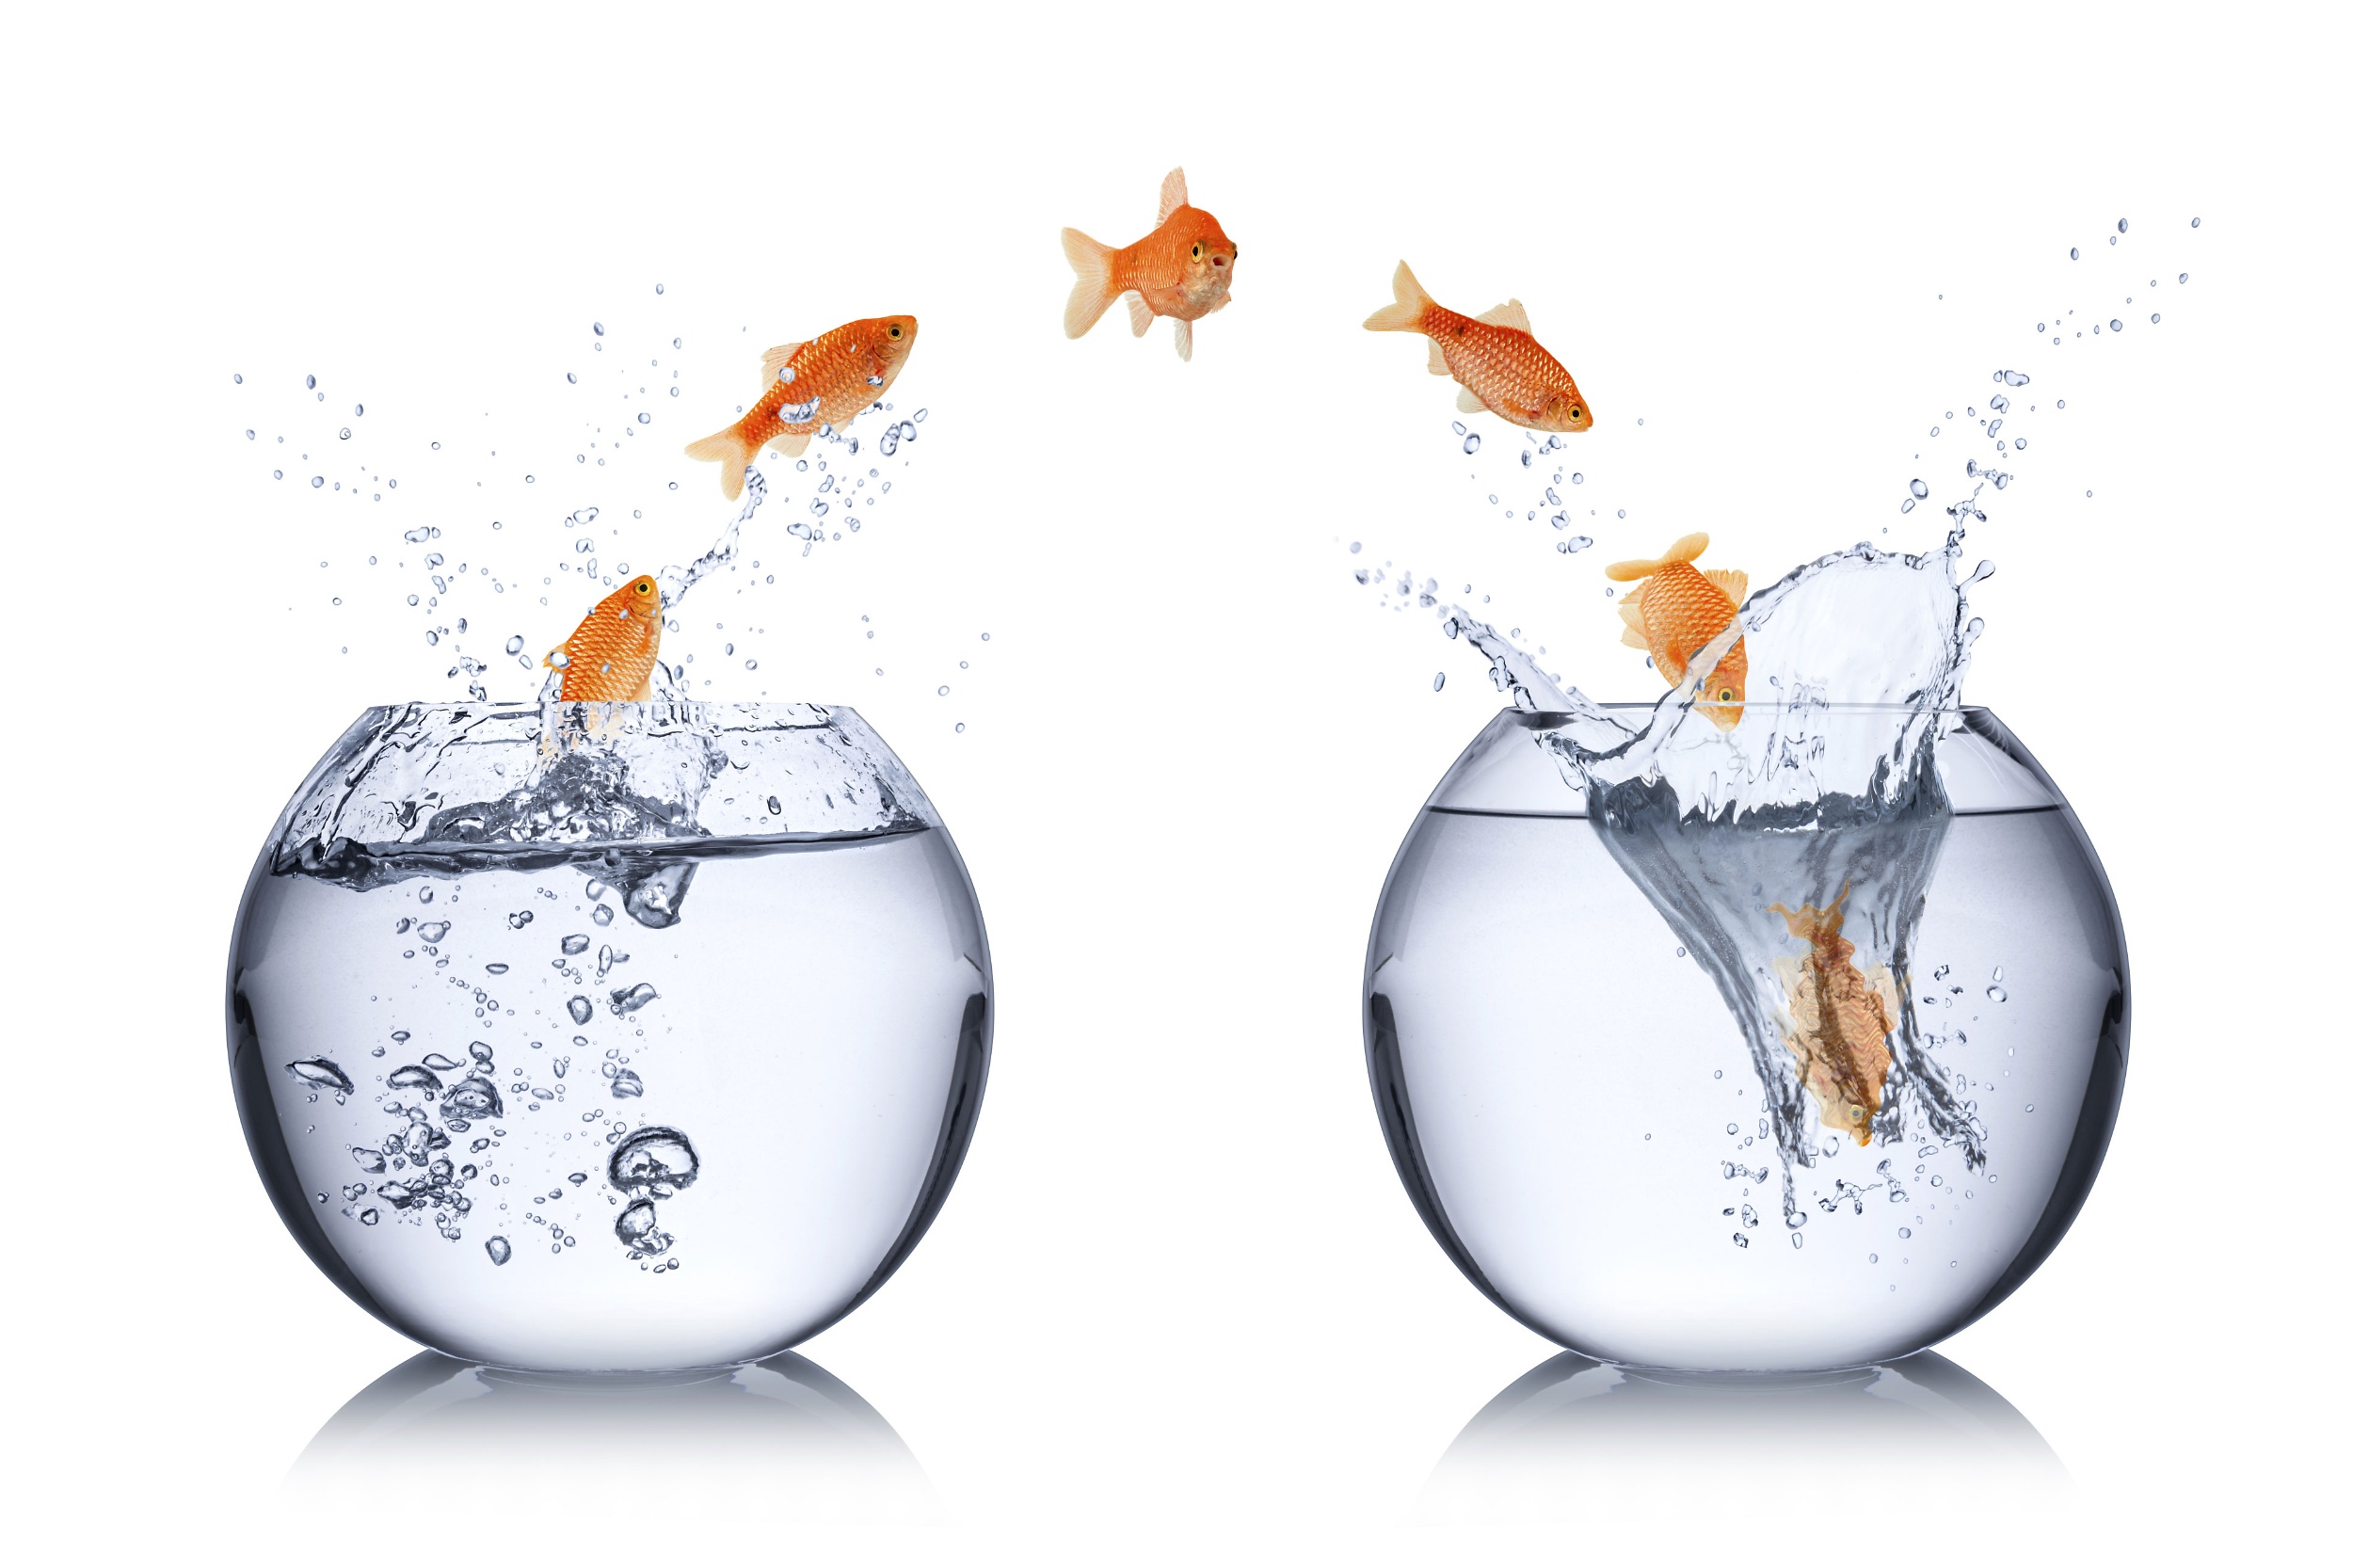 Transformaction involves leaping into a new fishbowl